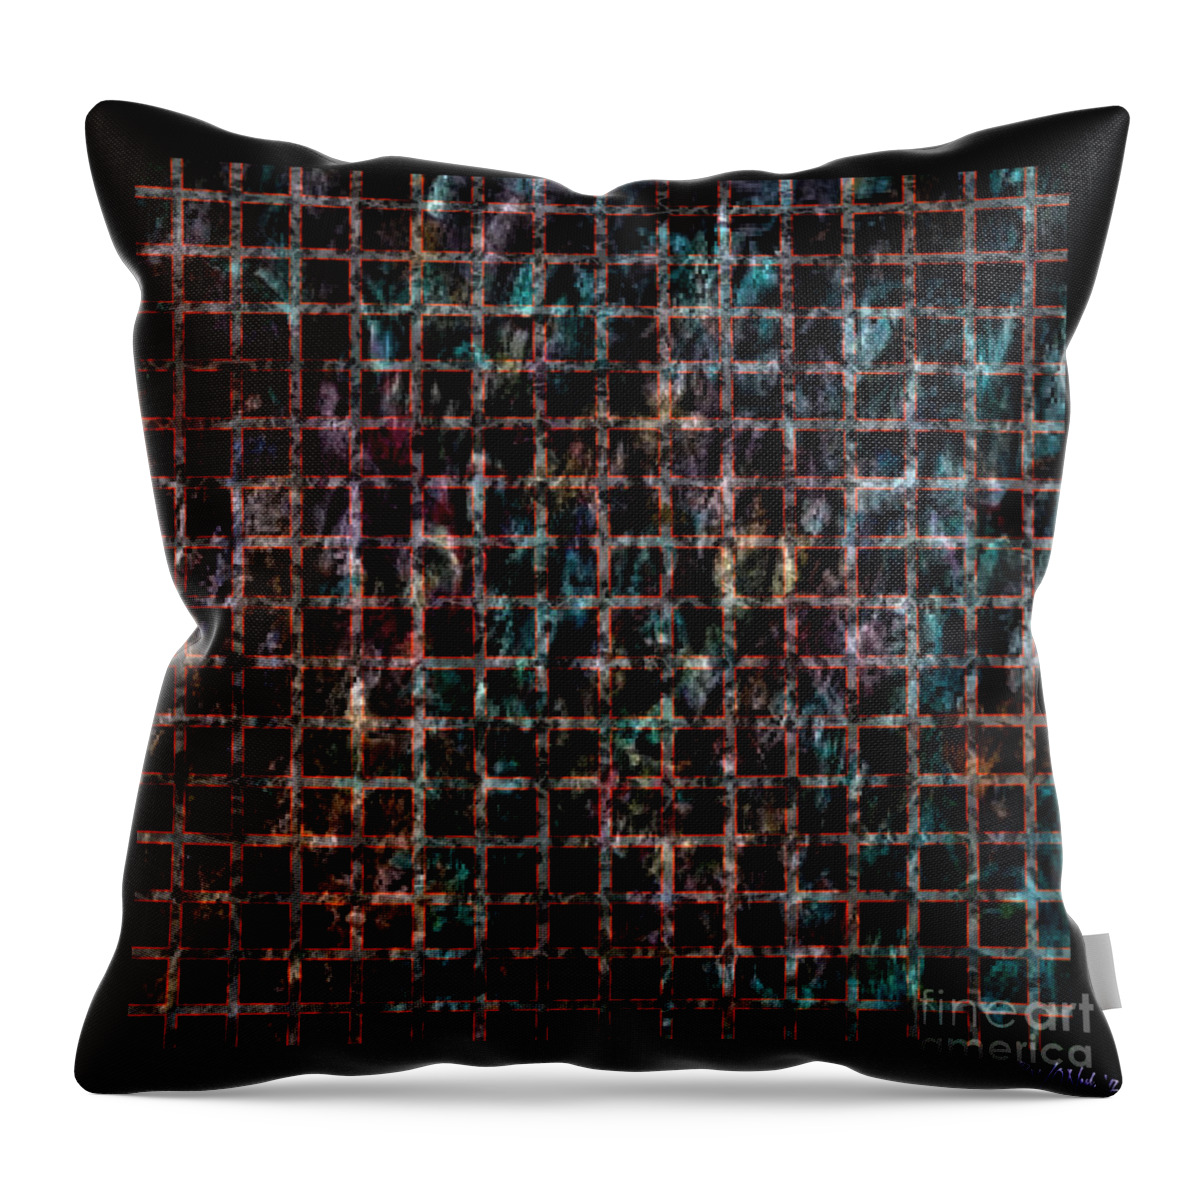 Conceptual Throw Pillow featuring the digital art Grid Series 3-4 by Walter Neal